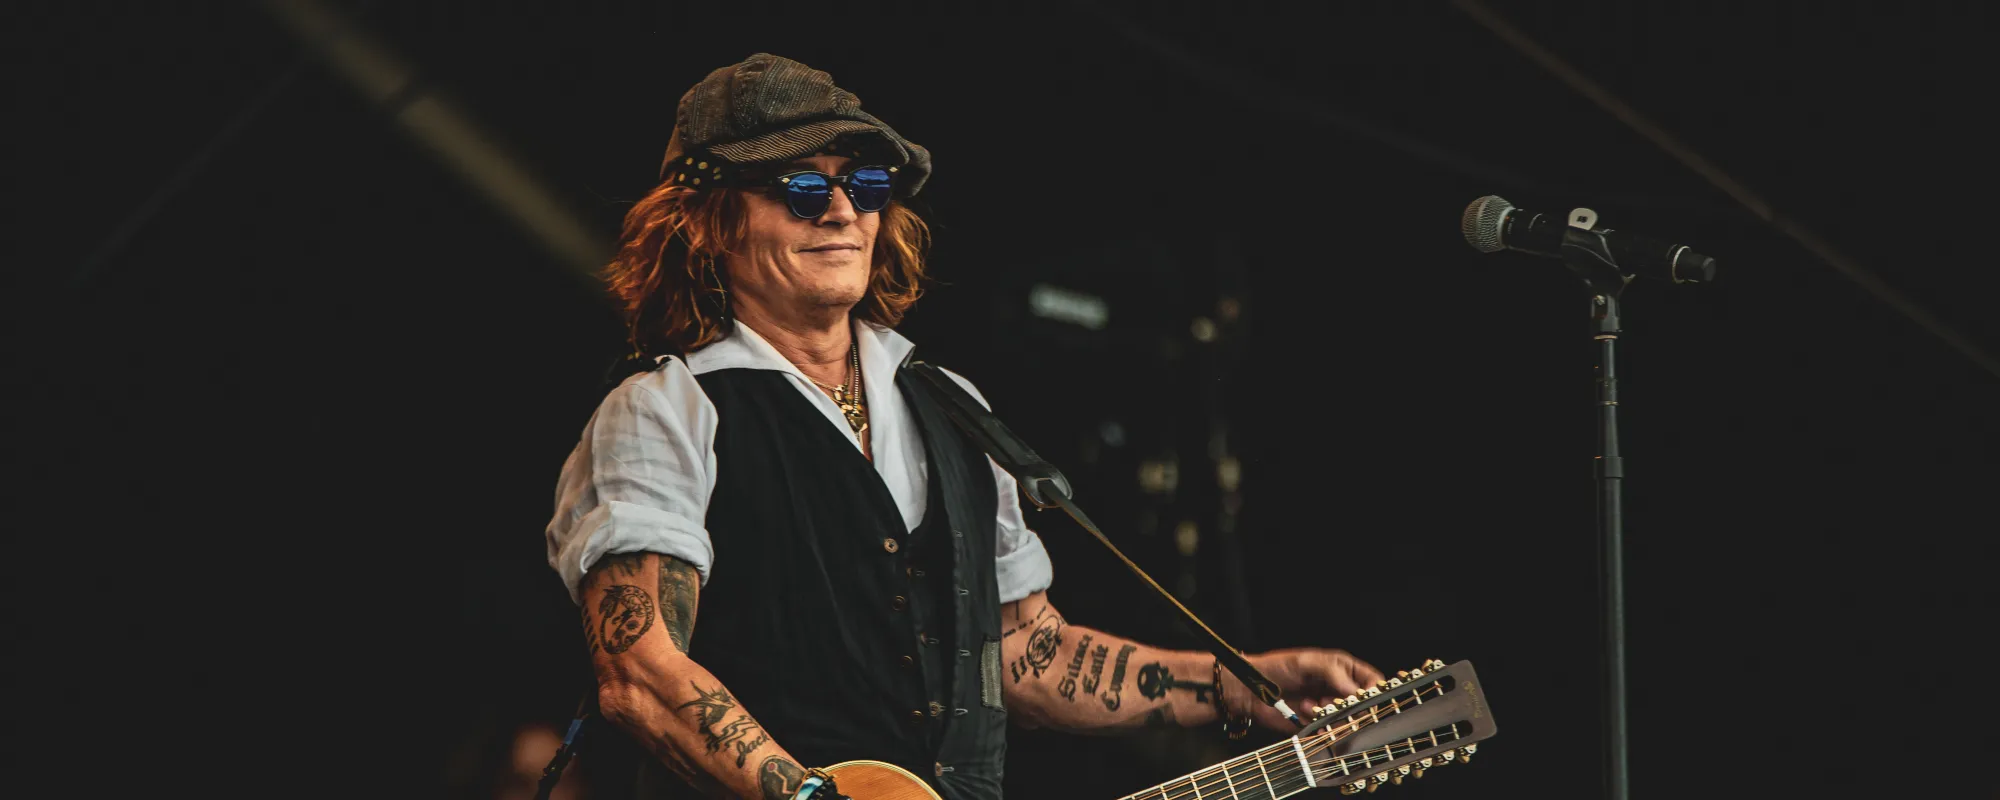 Kirk Hammett, Billy F. Gibbons, and Johnny Depp Perform Together at Jeff Beck Tribute Concert